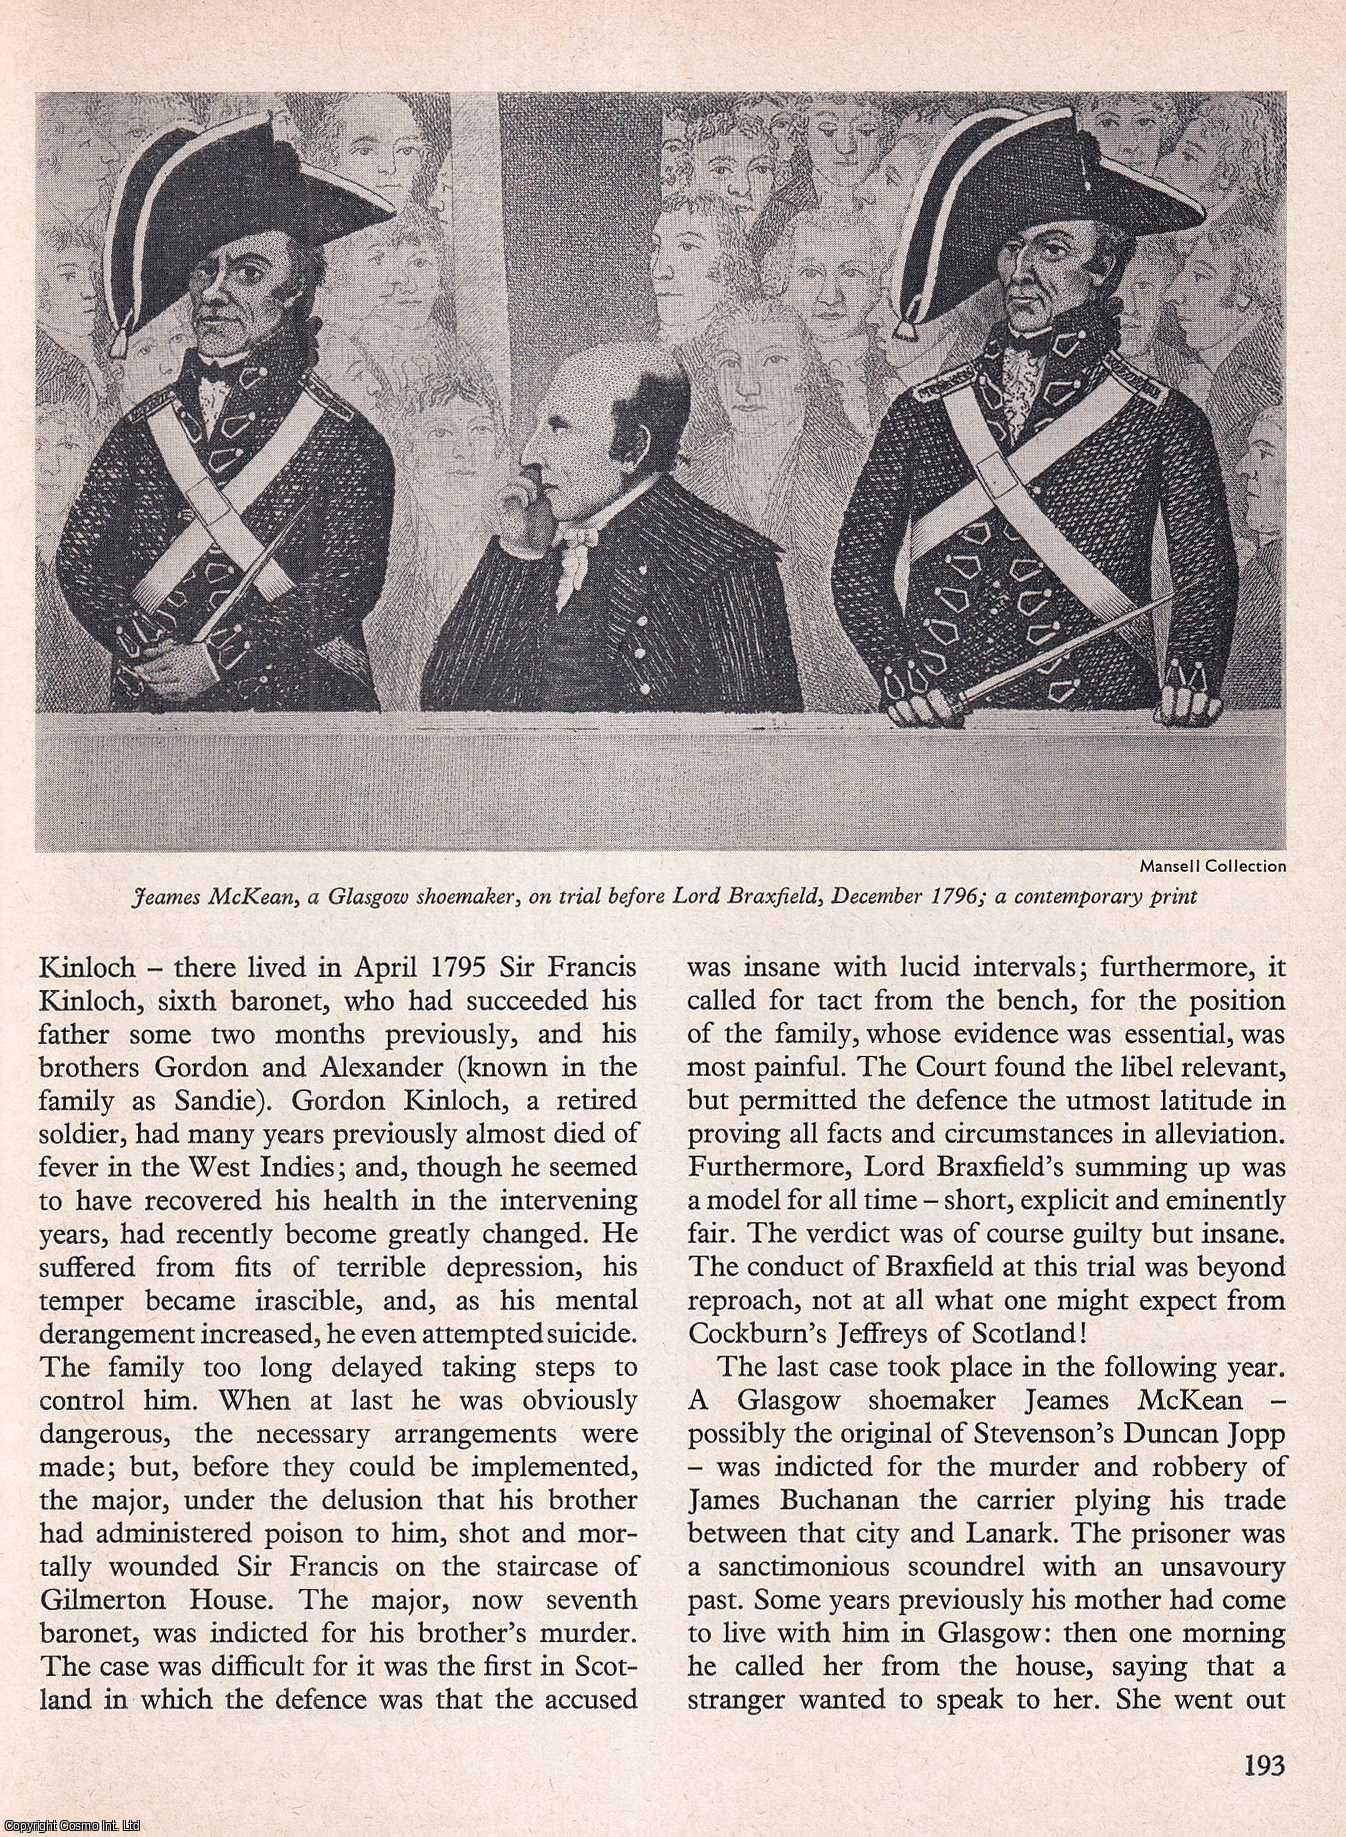 Tresham Lever - Lord Braxfield: The Jeffreys of Scotland. An original article from History Today magazine, 1973.